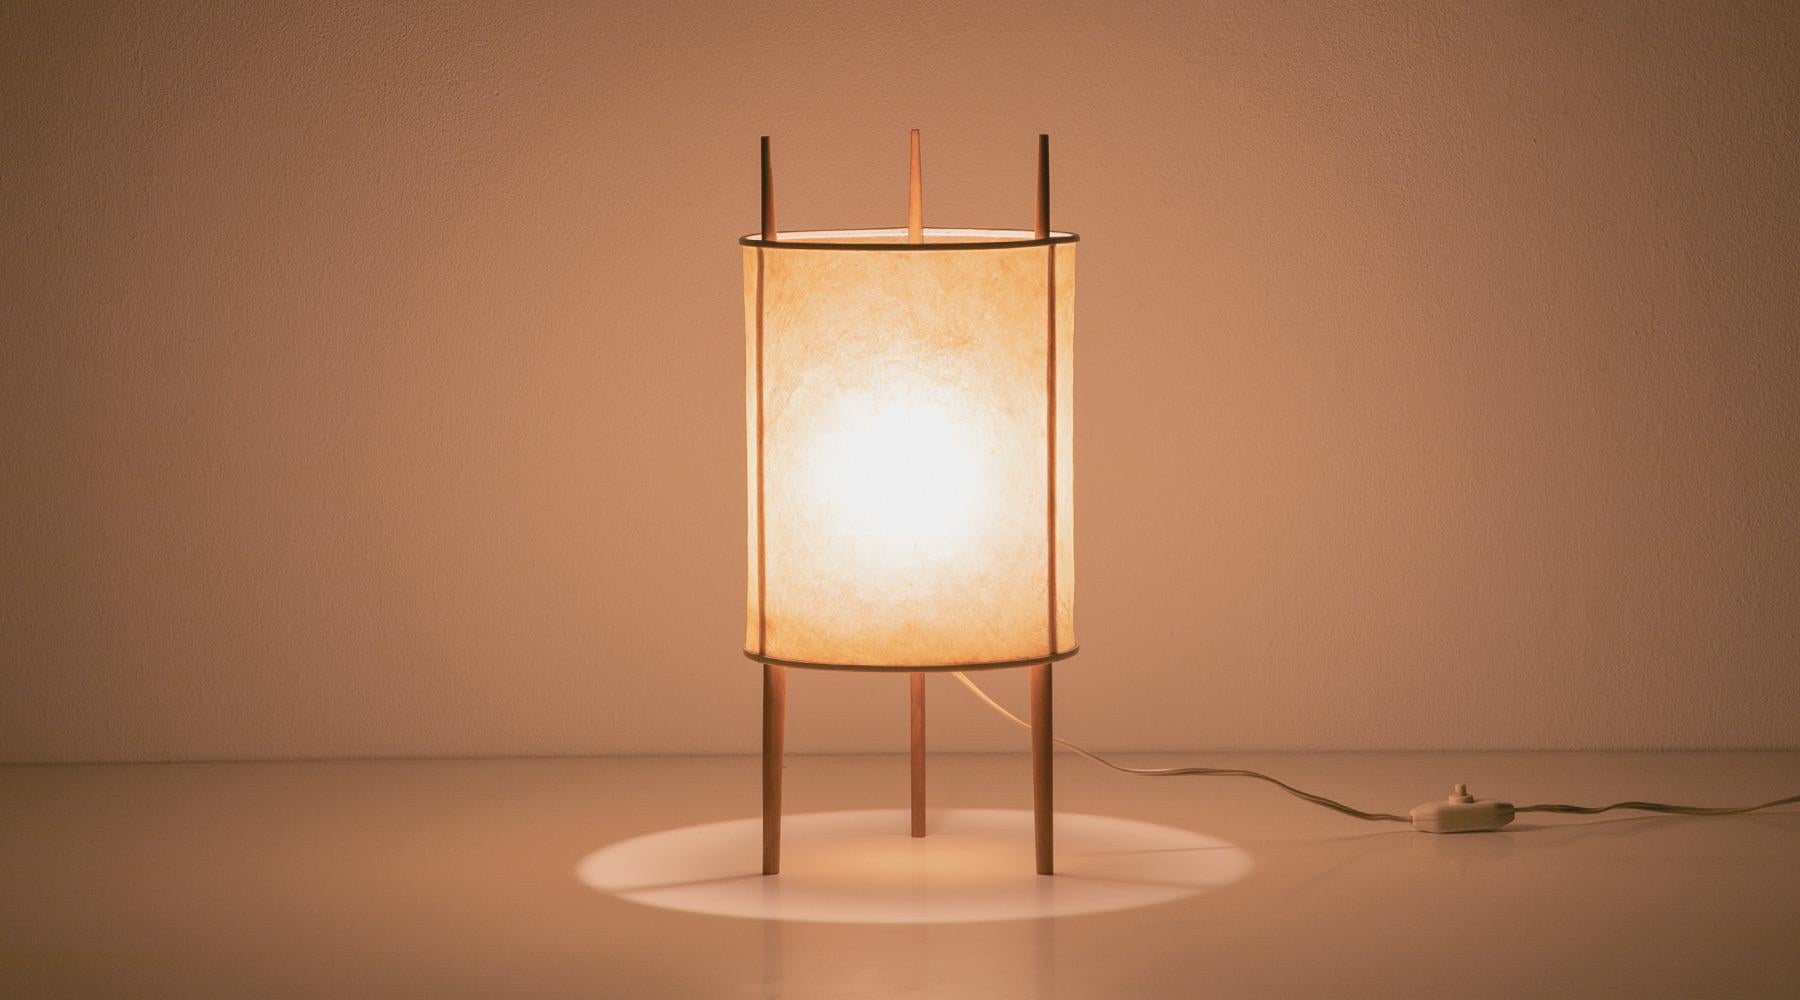 Sculptural light, table lamp by Isamu Noguchi, USA, 1947.

Beautiful table lamp by Isamu Noguchi. The shade is made out of fiberglas-reinforced polyvinyl and stands on three wooden sticks. The lamp promises a very warm, pleasant light.